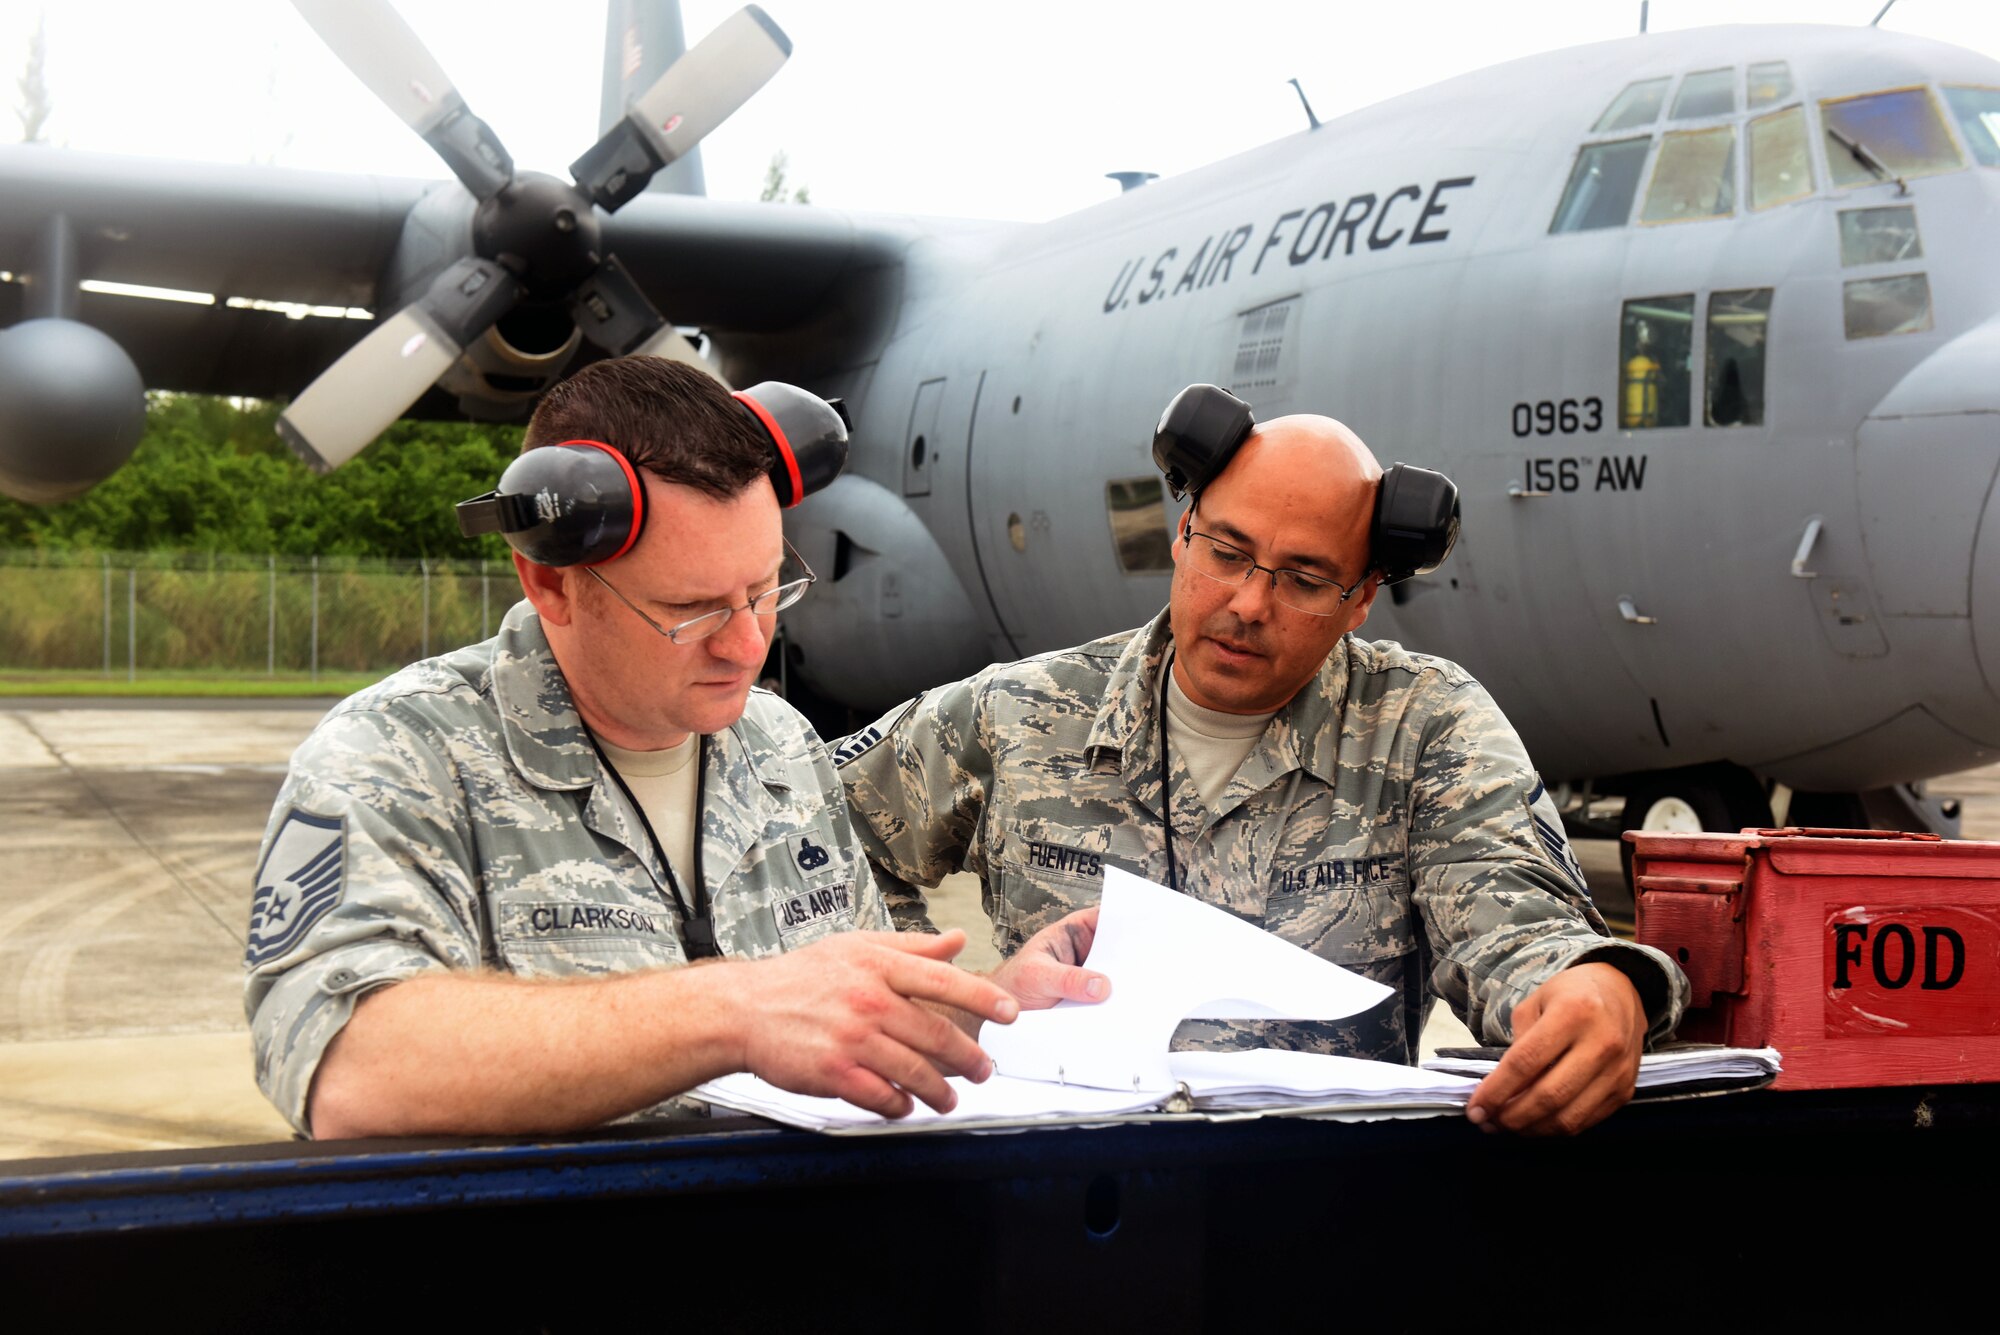 U.S. Air Force Master Sgt. Jeremy Clarkson, Air Mobility Command aircraft maintenance inspector, reviews a hurricane evacuation plan checklist with Master Sgt. Julio Fuentes, 156th Maintenance Squadron aircraft maintenance coordinator, during a category 5 hurricane exercise on Muñiz Air National Guard Base, Carolina, Puerto Rico, April 30. Members of the AMC Inspector General team completed a mid-point review visit to evaluate the 156th Wing Inspection Team. (U.S. Air National Guard photo by Tech. Sgt. Efraín Sánchez)